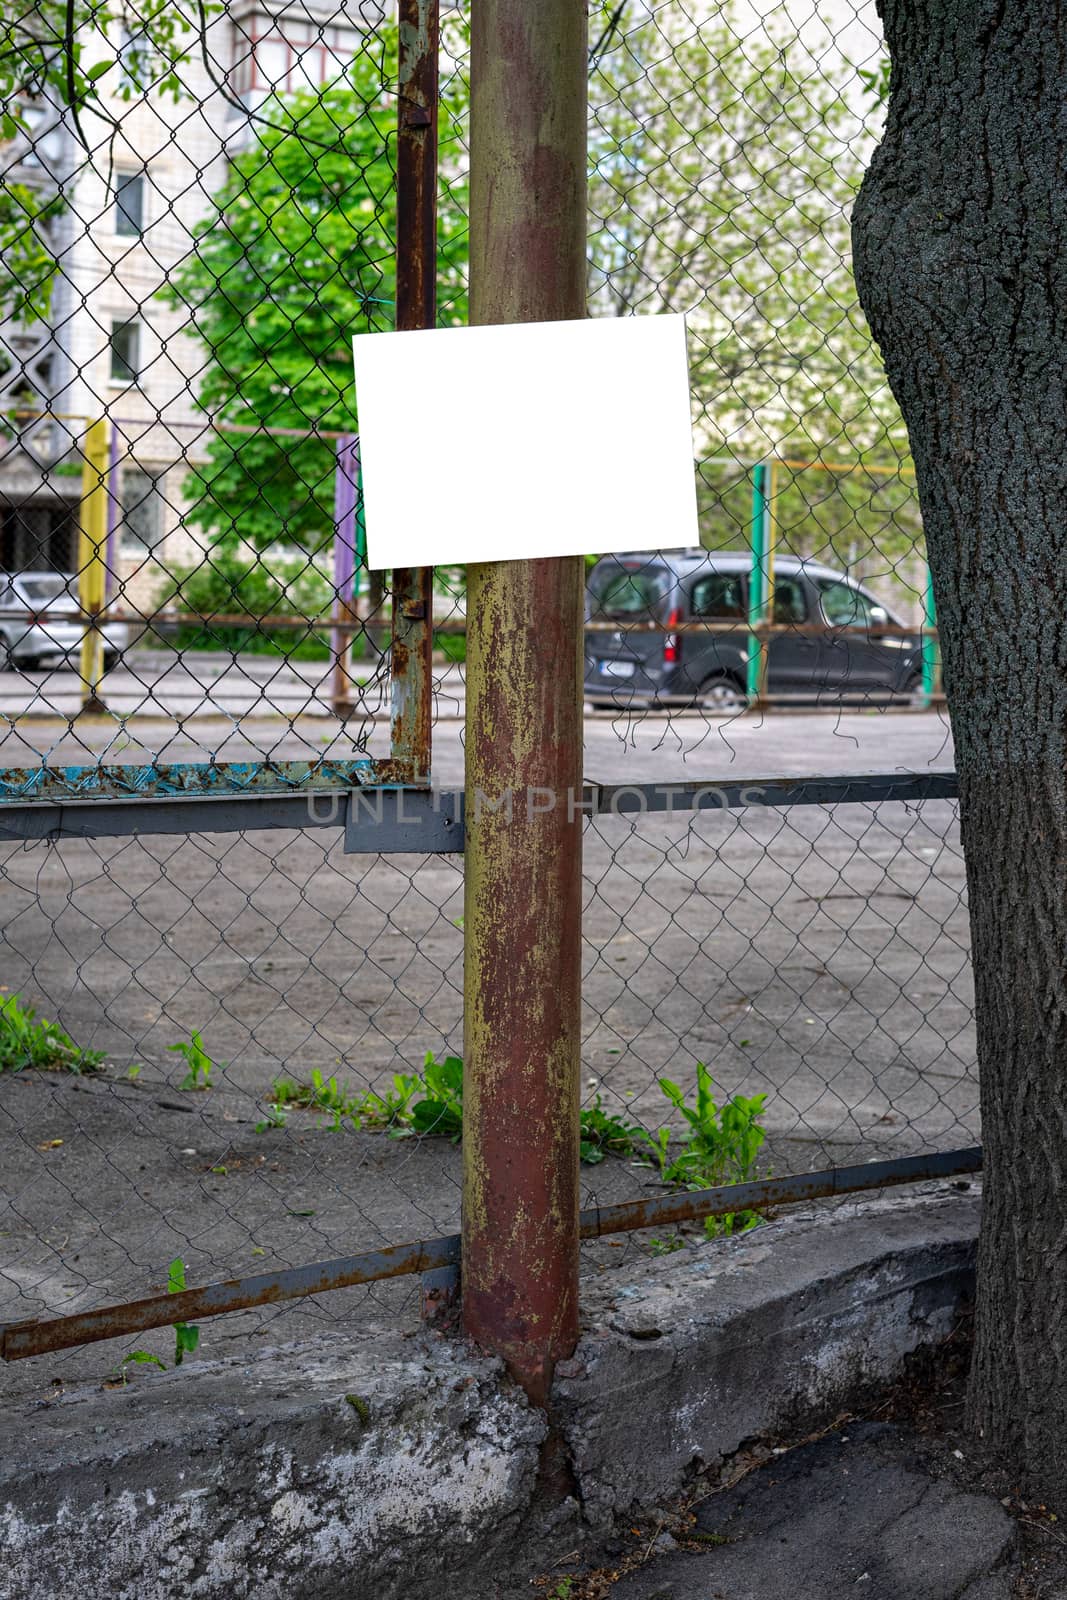 Basketball court fenced with a net. On the pillar hangs a sign for the inscription by Serhii_Voroshchuk